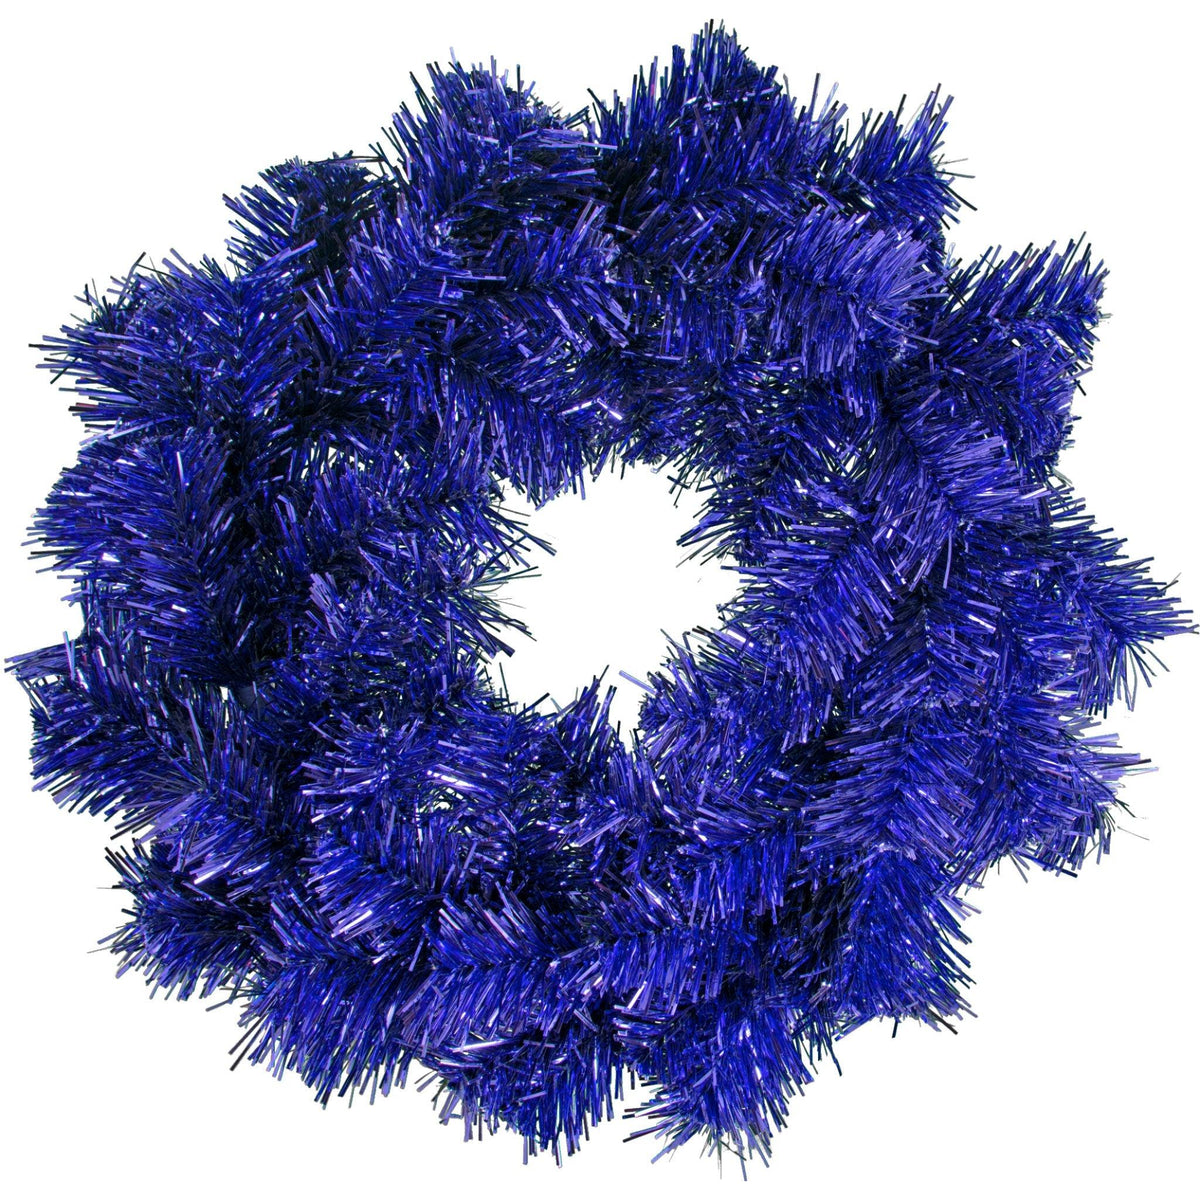 18IN Shiny Blue Tinsel Christmas Wreaths! Decorative 18in Diameter door hanging wreaths made by Lee Display.